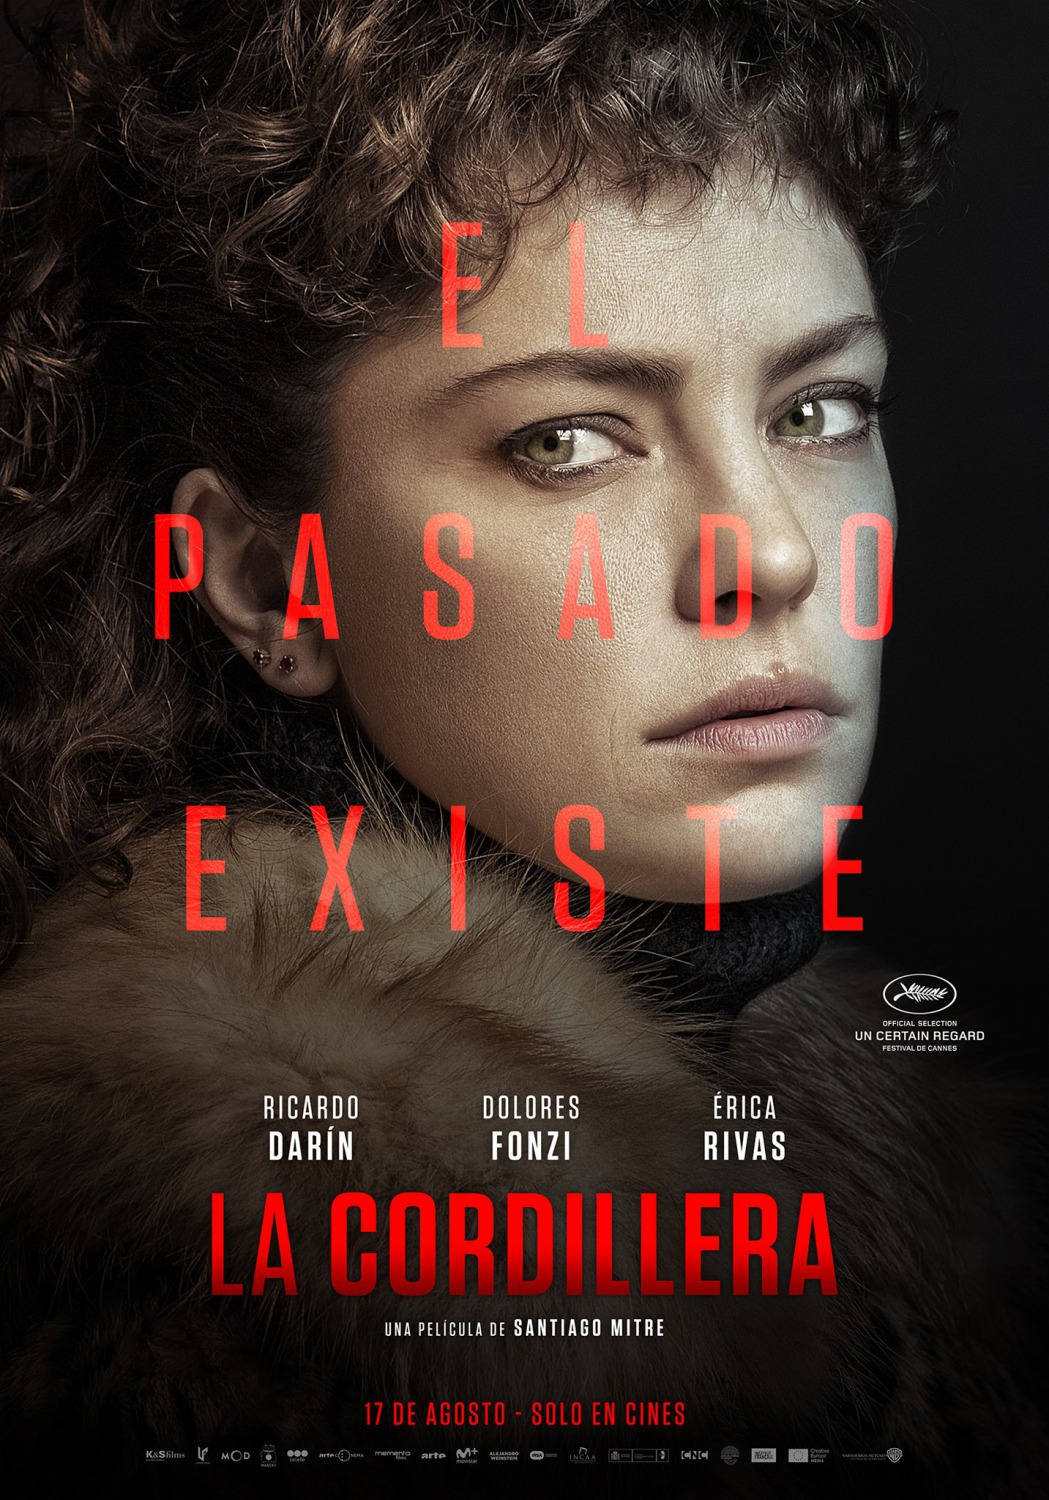 Extra Large Movie Poster Image for La cordillera (#4 of 5)